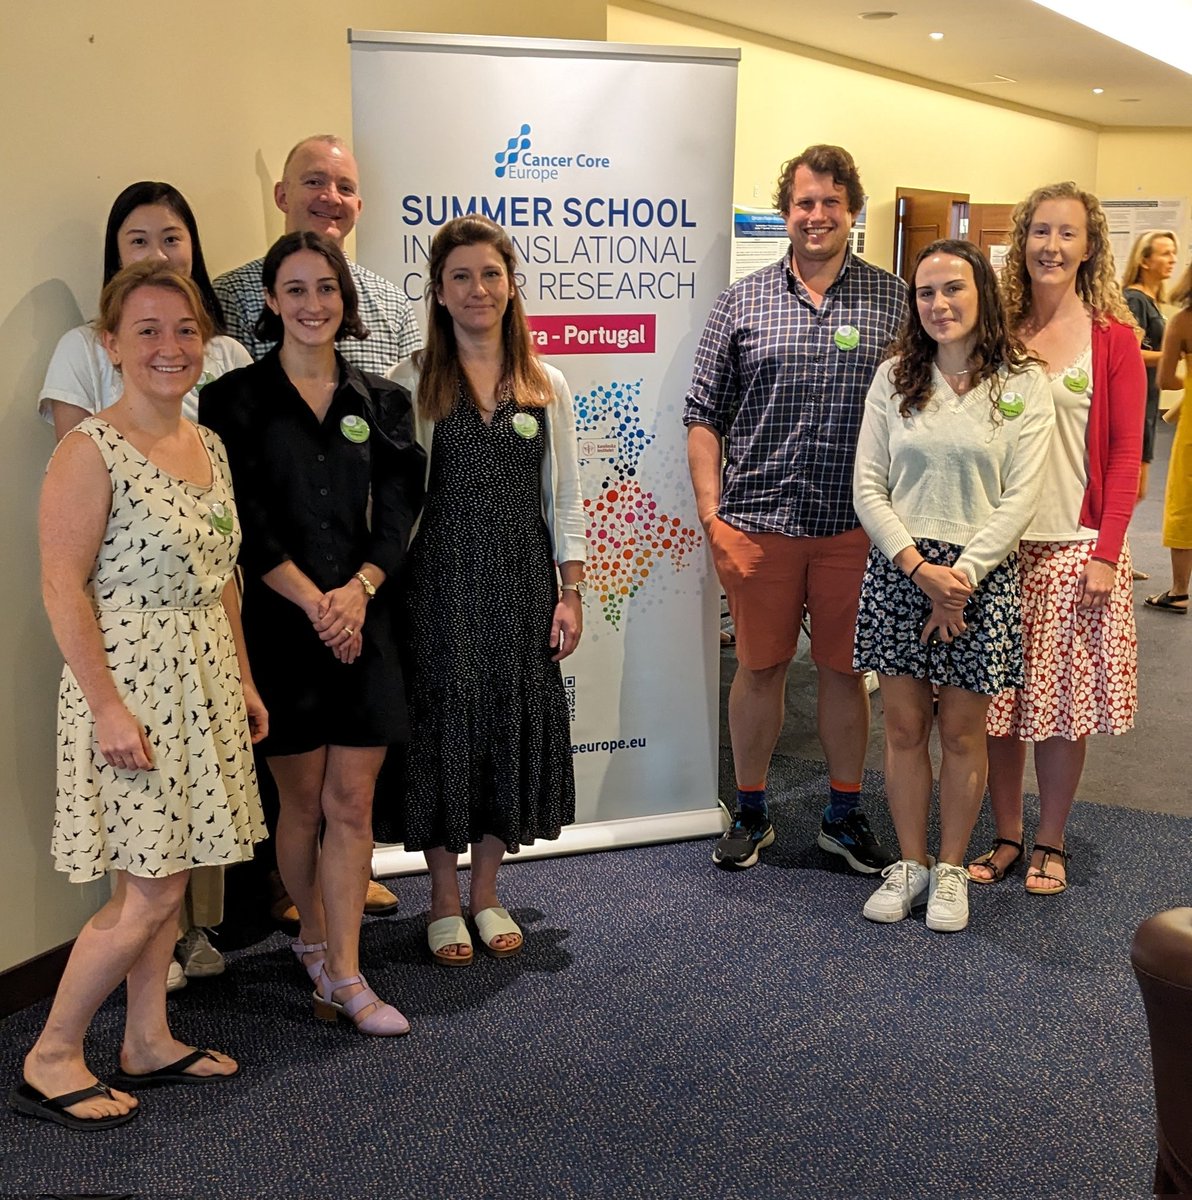 The Cambridge crew are here in sunny Faro, Portugal, ready to learn and meet new connections at the #CCESumSchool23! 👨‍🎓👩‍🎓🏫🧬🔬👩‍⚕️👨‍⚕️👩‍🔬👨‍💻😎
#translationalmedicine #cancerresearch #martawylot #katrinaxian @cancercoreEU